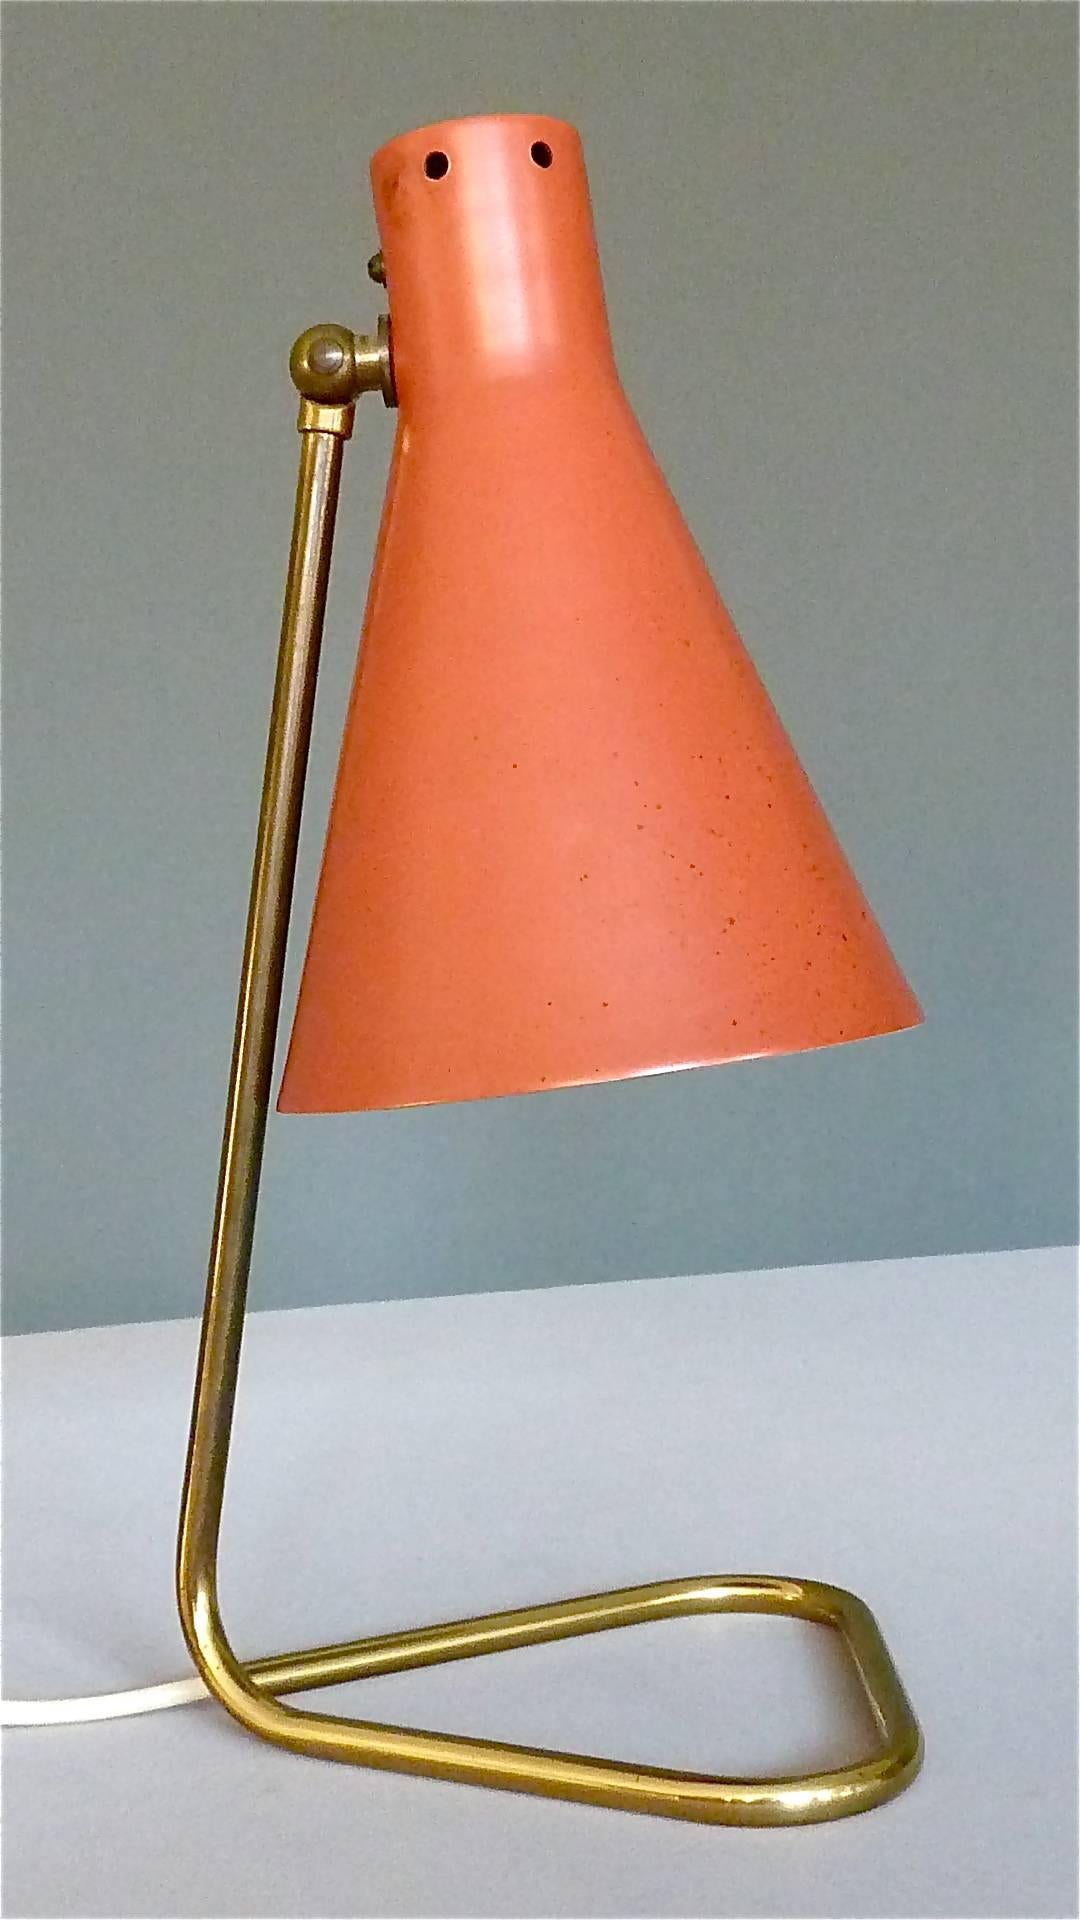 Wonderful midcentury and fabulous of vintage multifunctional table / wall lamp which is made by one of the famous companies Stilnovo, Oluce, Arredoluce, Arteluce or Kalmar attribution, Italy circa 1950s. The adjustable lamp which is made of a